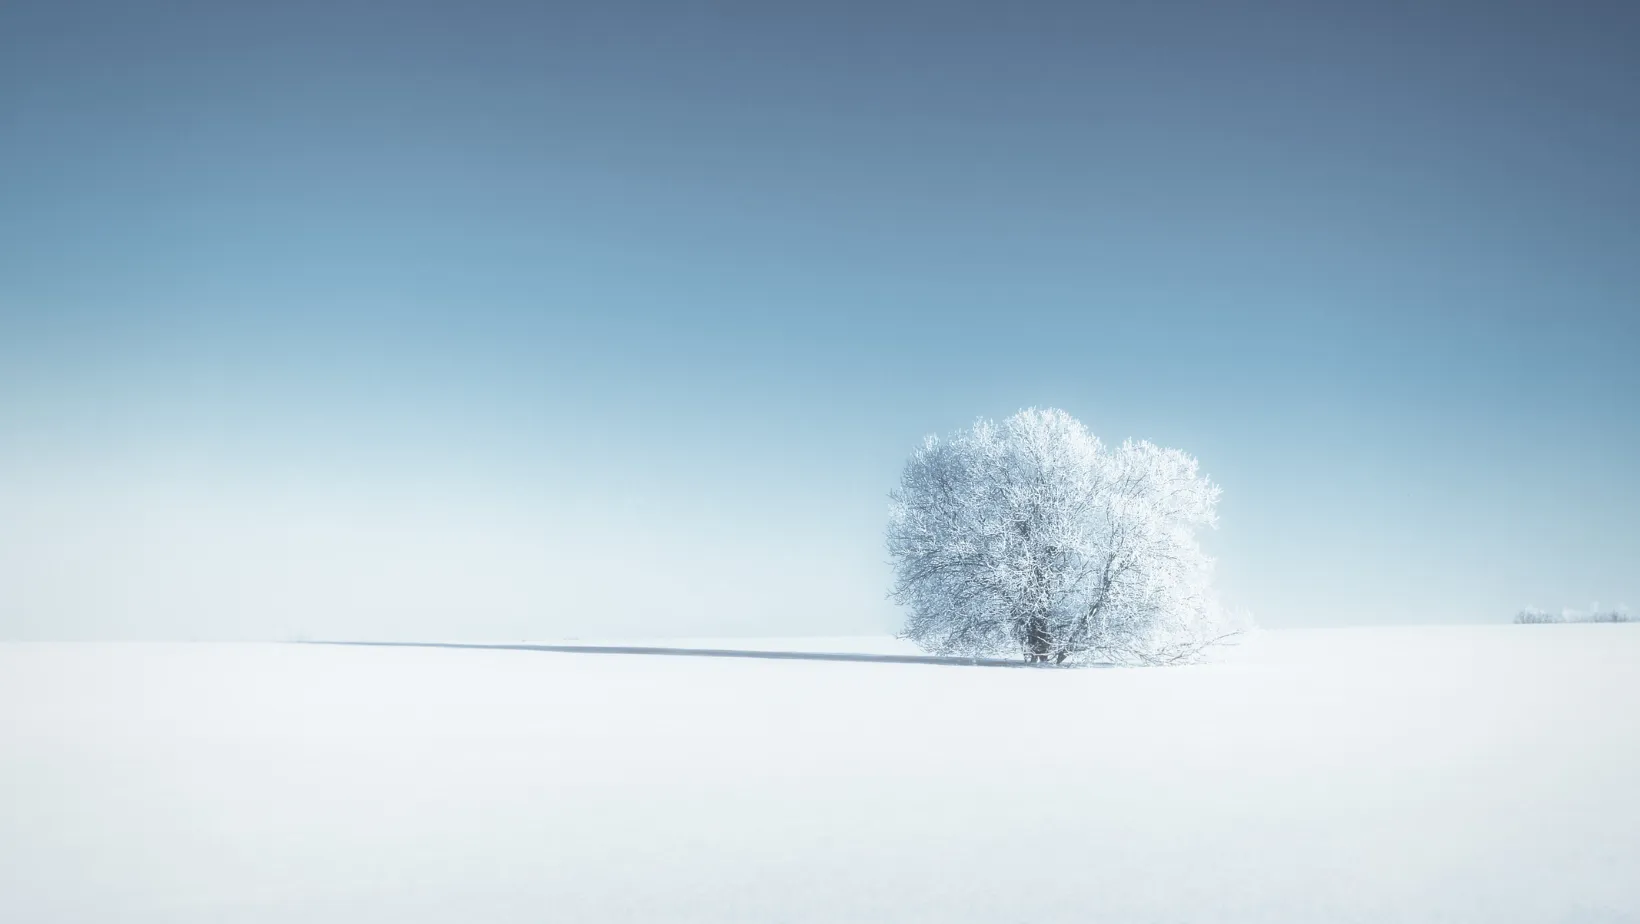 Tree in the middle of snow covered ground on sunny day